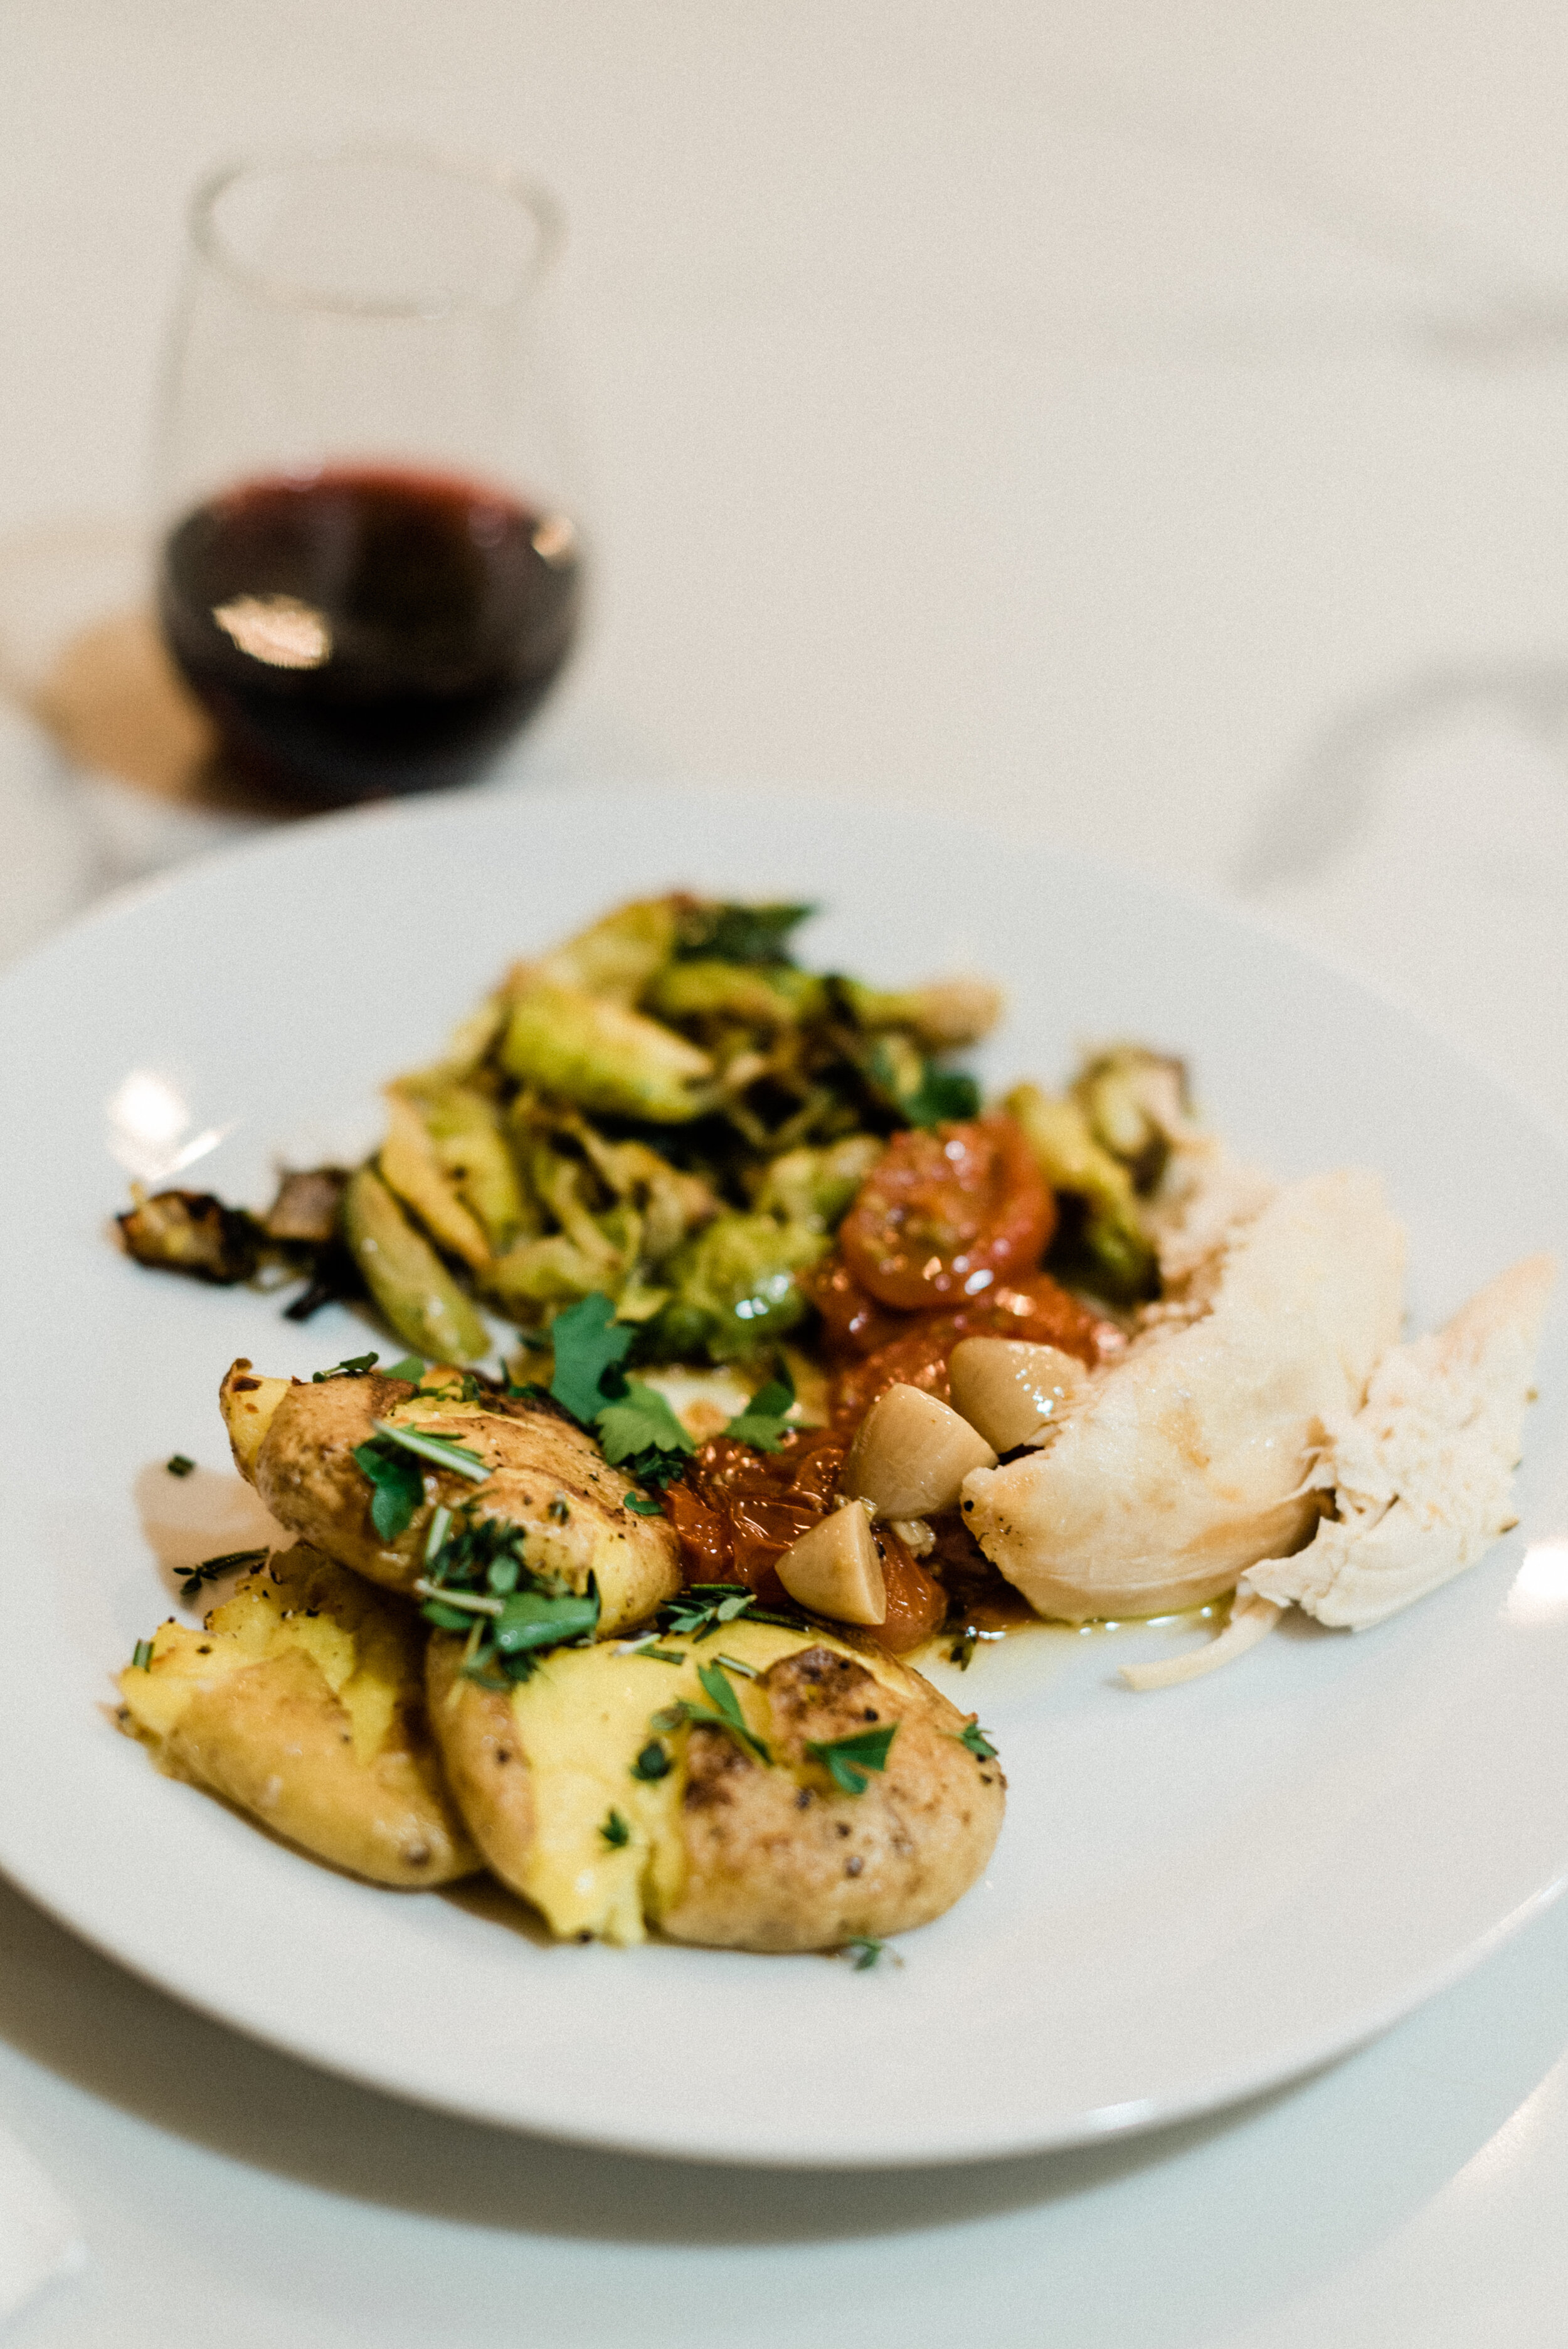 Slow-Roasted Oregano Chicken With Buttered Tomatoes Recipe - NYT